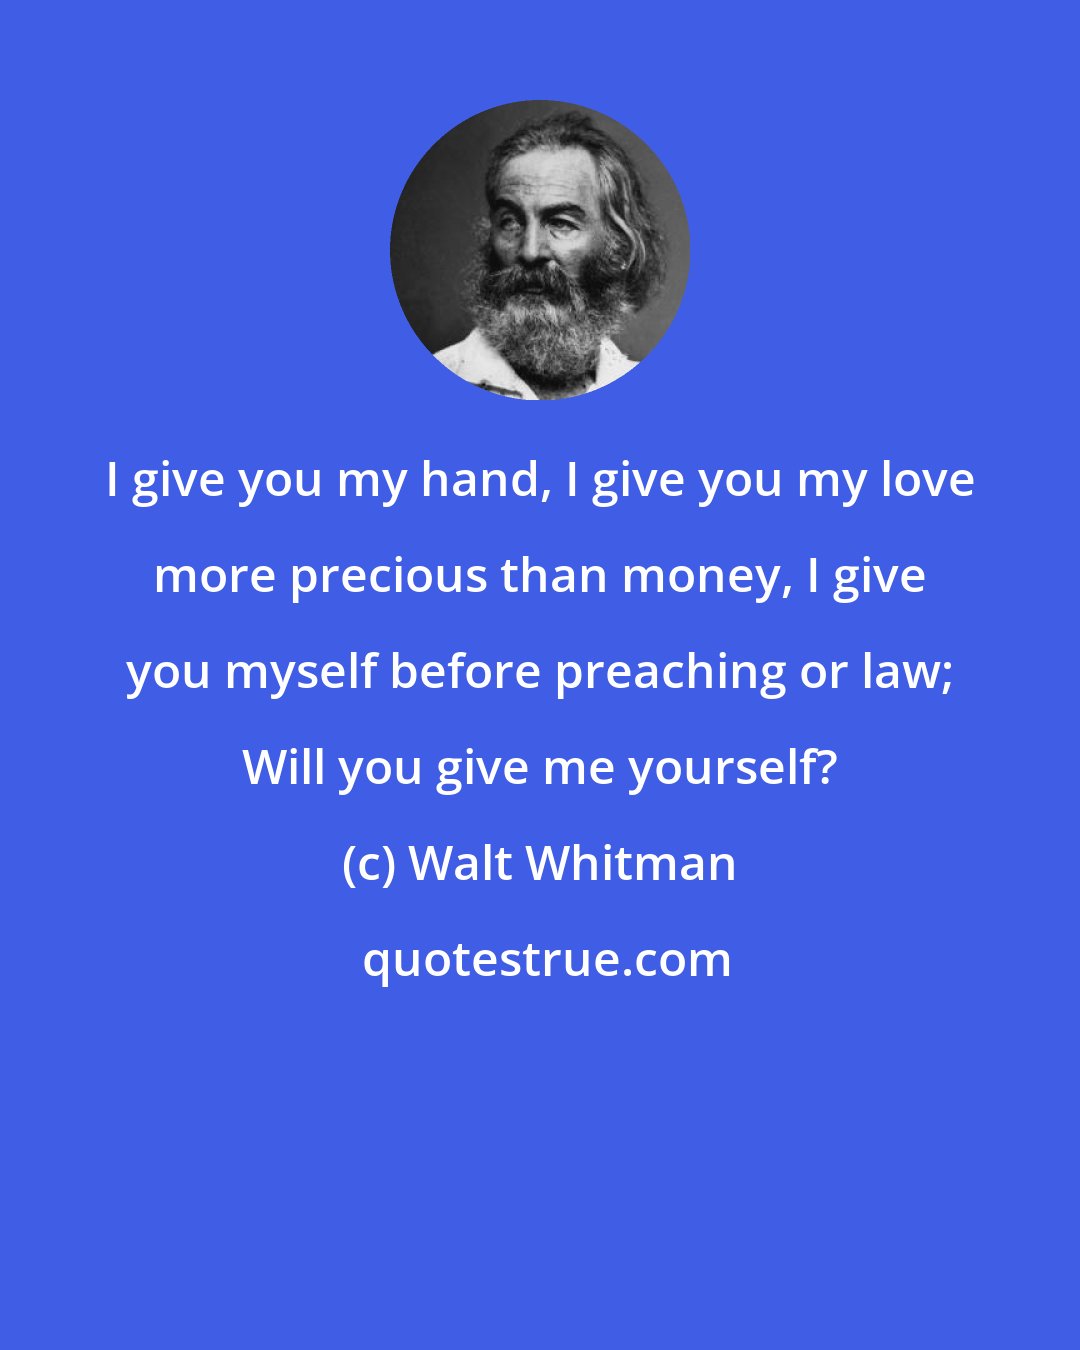 Walt Whitman: I give you my hand, I give you my love more precious than money, I give you myself before preaching or law; Will you give me yourself?